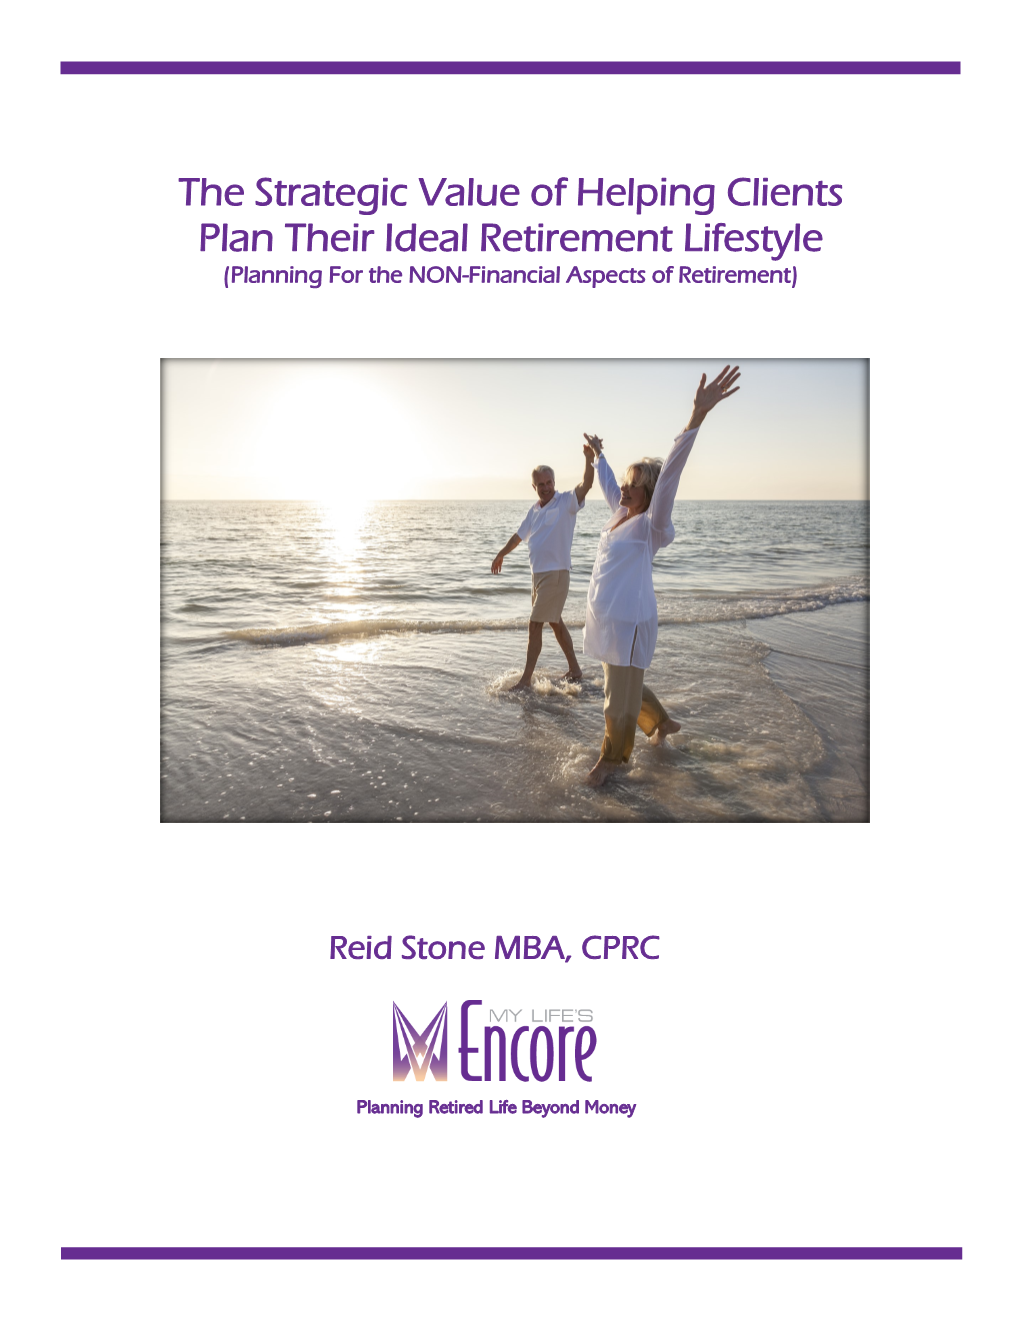 The Strategic Value of Helping Clients Plan Their Ideal Retirement Lifestyle (Planning for the NON-Financial Aspects of Retirement)